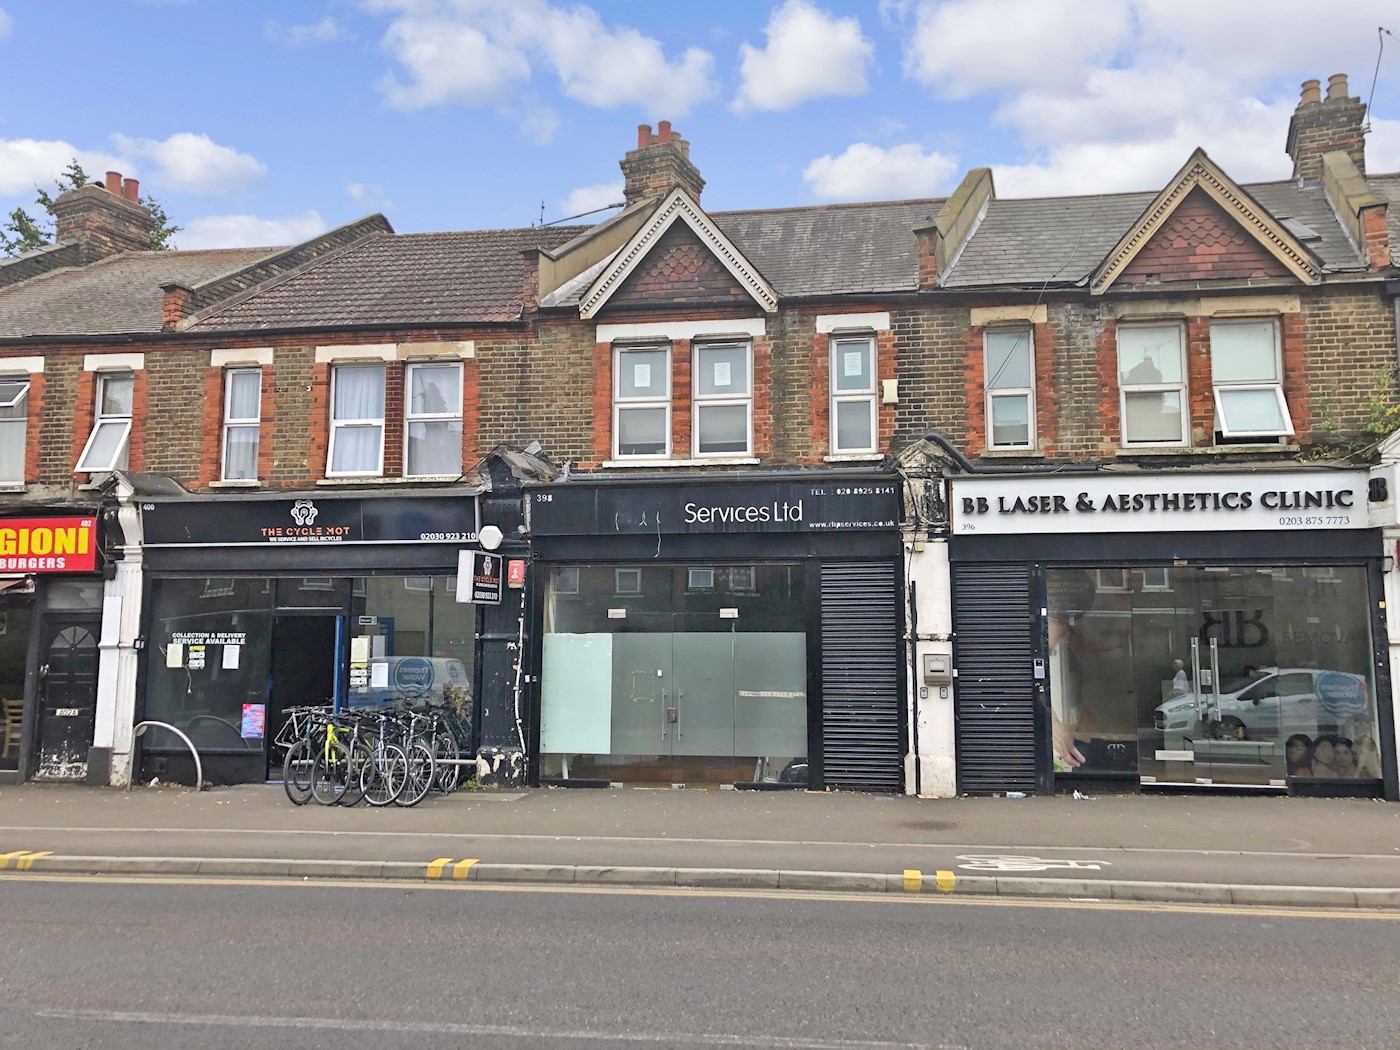 398 Forest Road, Walthamstow, E17 5JF 1/7